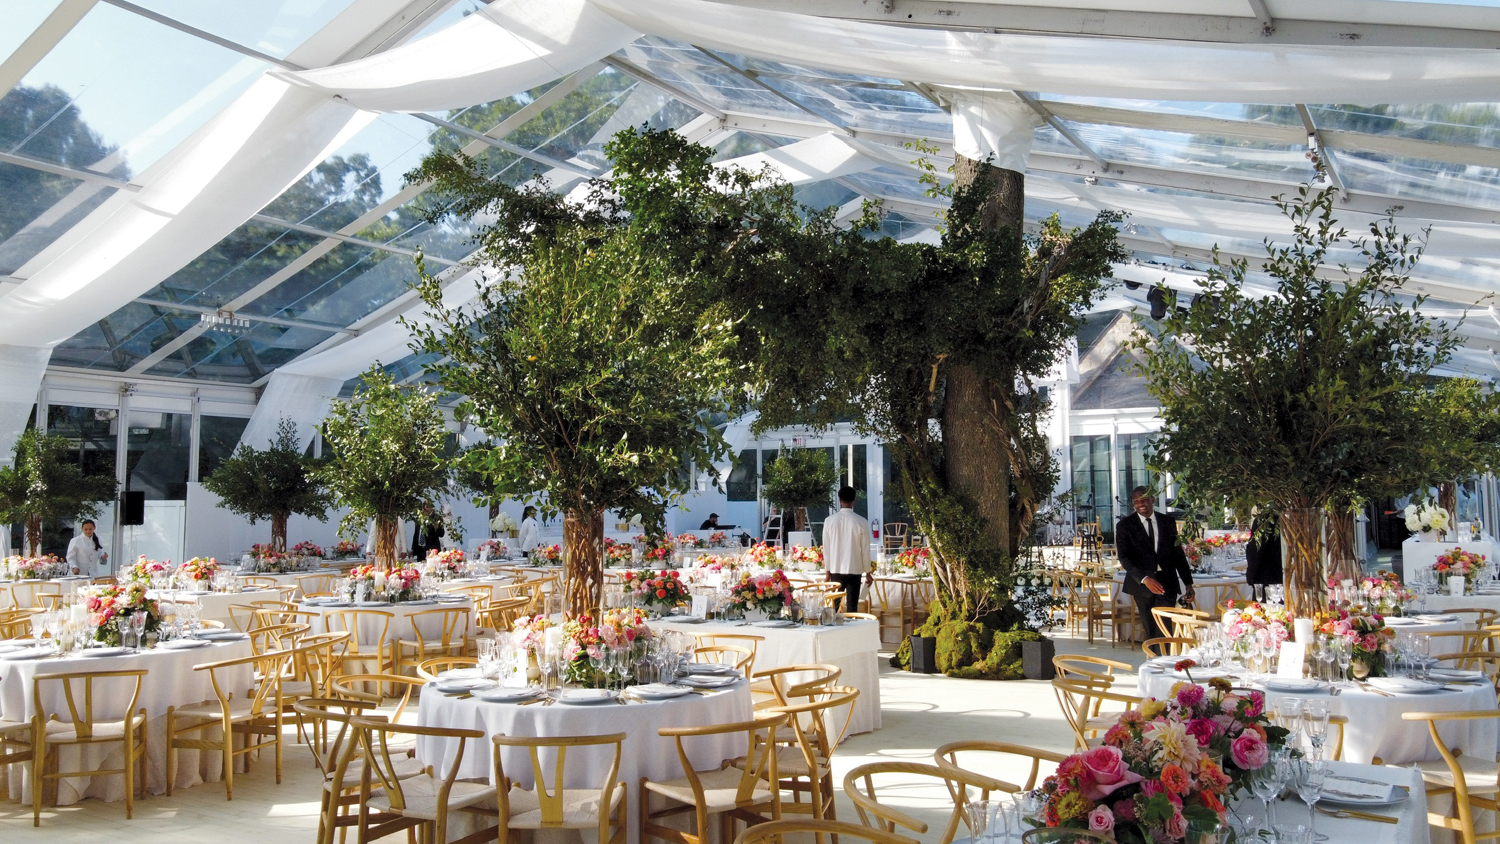 Project showcase: Stamford Tent & Event – InTents